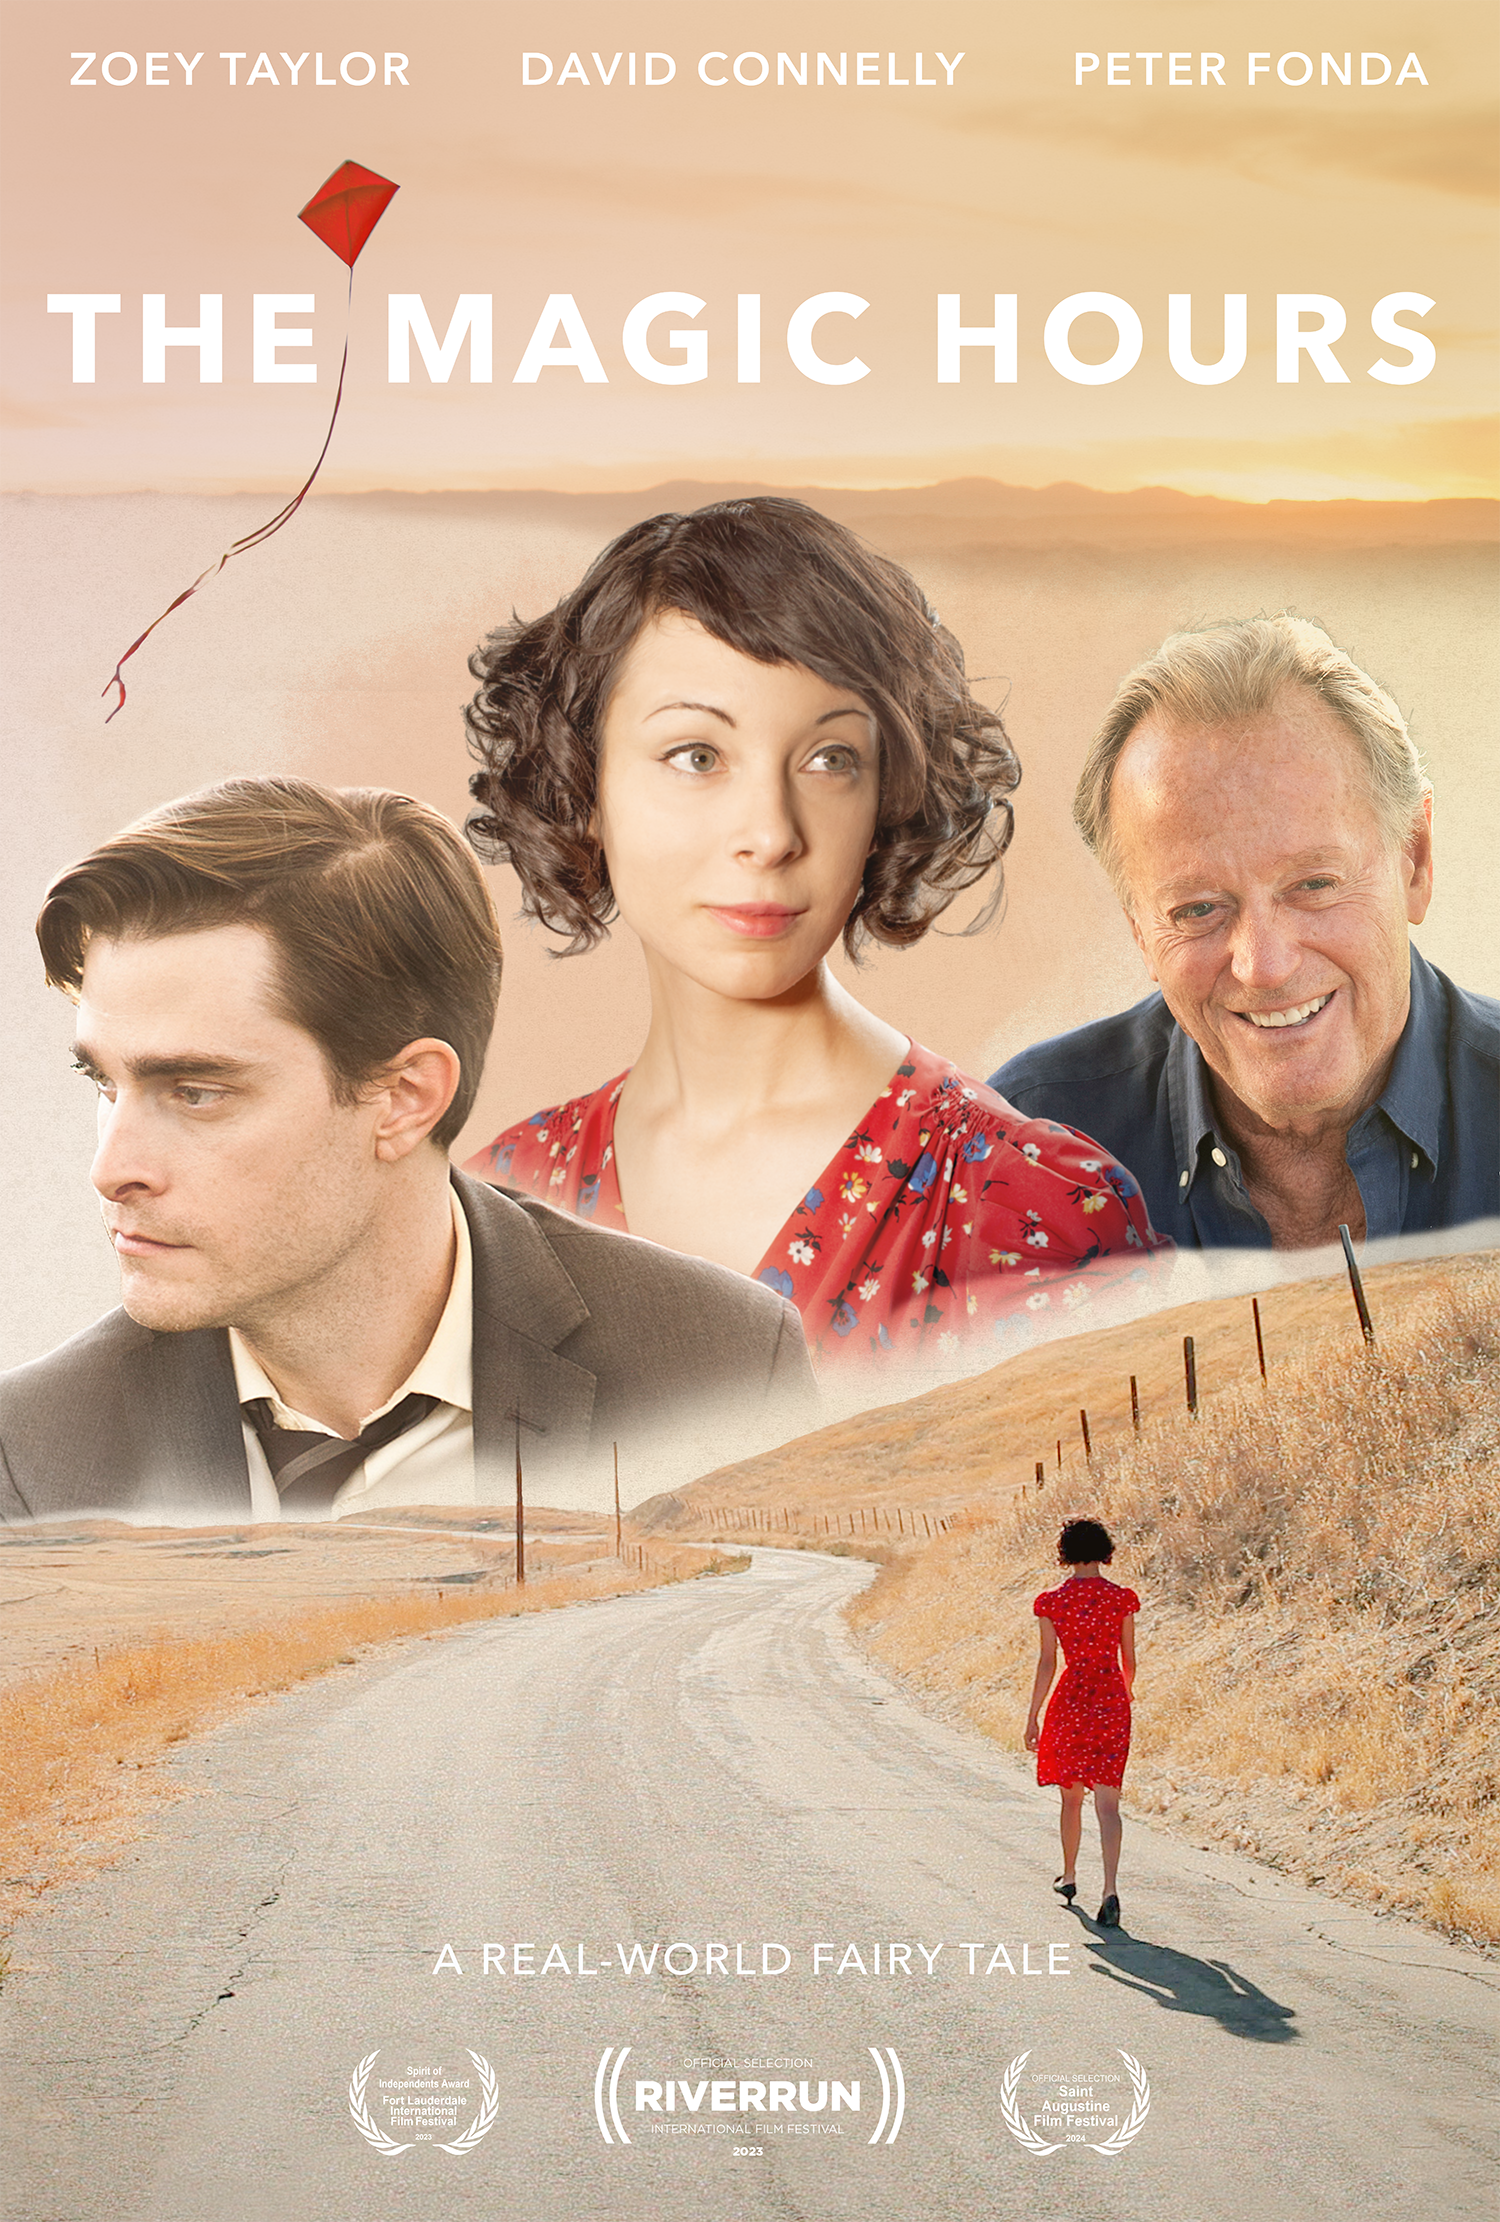 The Magic Hours Poster A 011724 SMALL 1.png